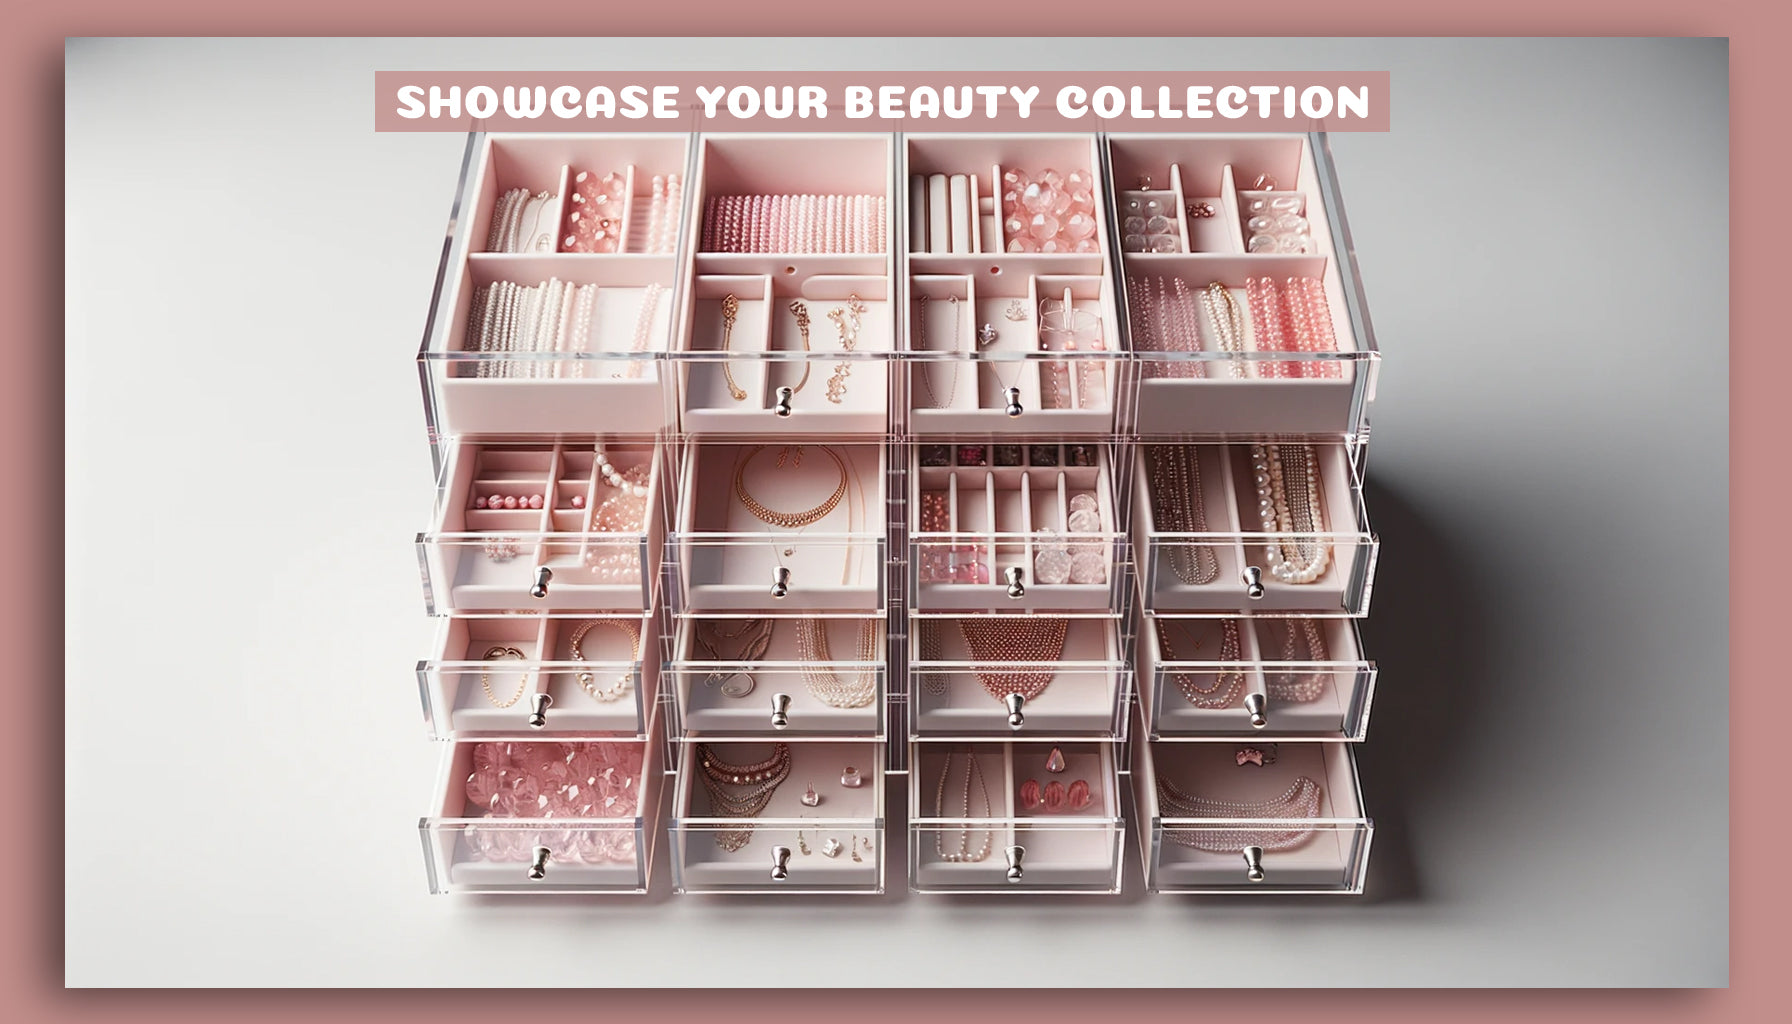 Makeup Brush Silicone Case Travel Brushes Makeup Silicone Makeup Applicator  Silicon Molds Sleek Travel Container Makeup Brush Bag Make up Brush Holder  Silicone Brush Storage Case 